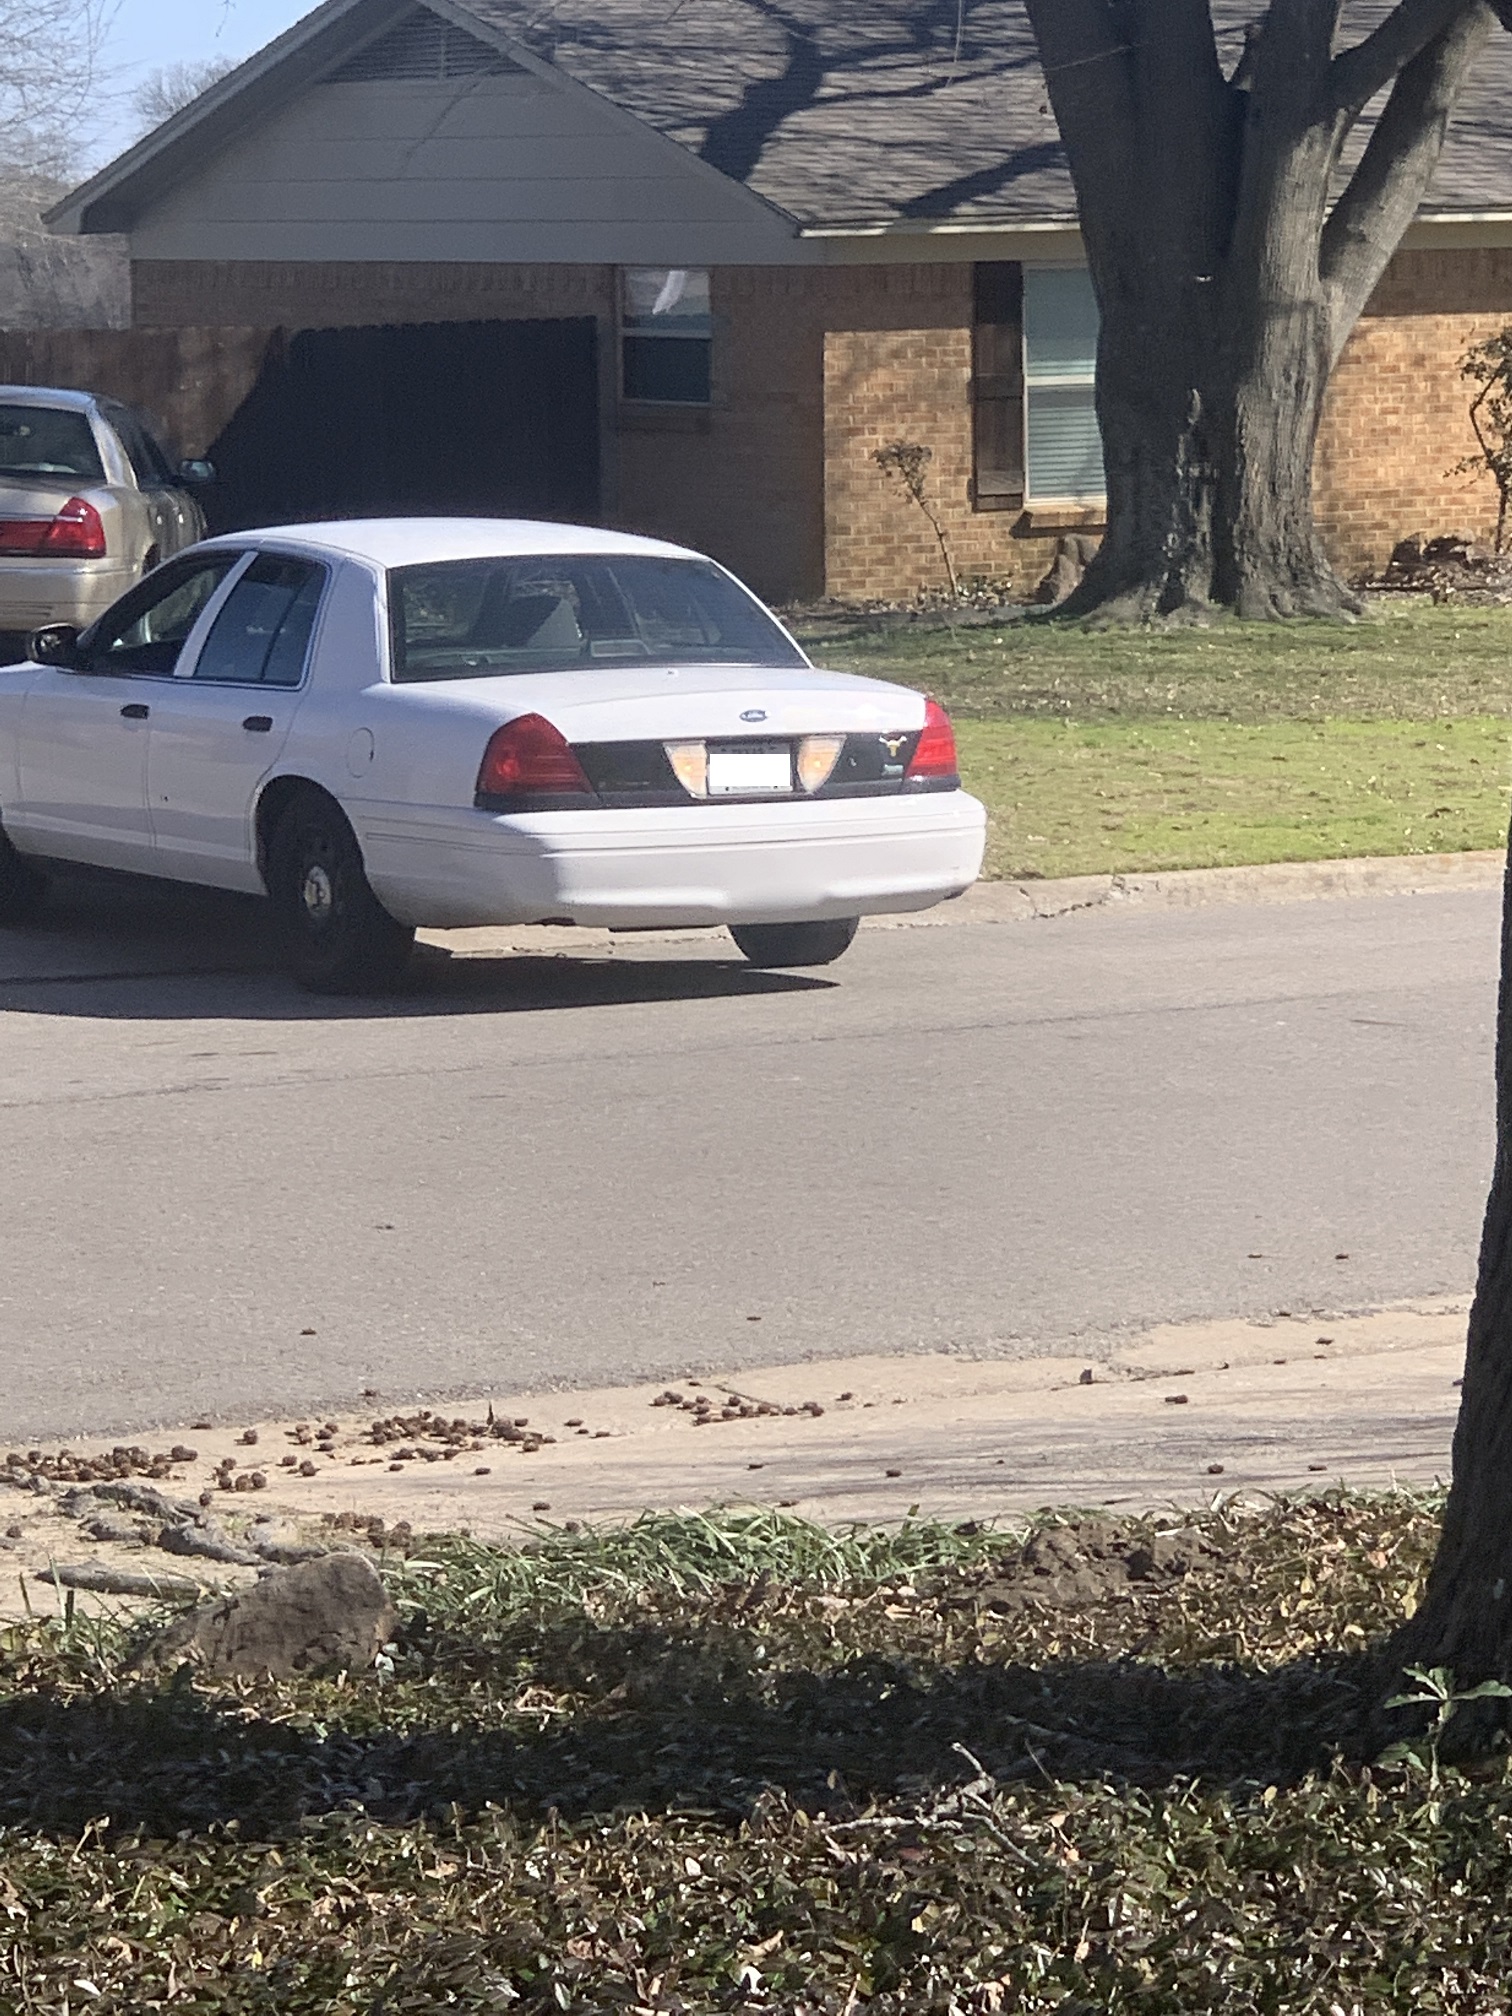 Dallas Man Arrested In Sulphur Springs Neighborhood After SSPD Receives Reports of Him Approaching Children to Help Him Catch Lost Dog